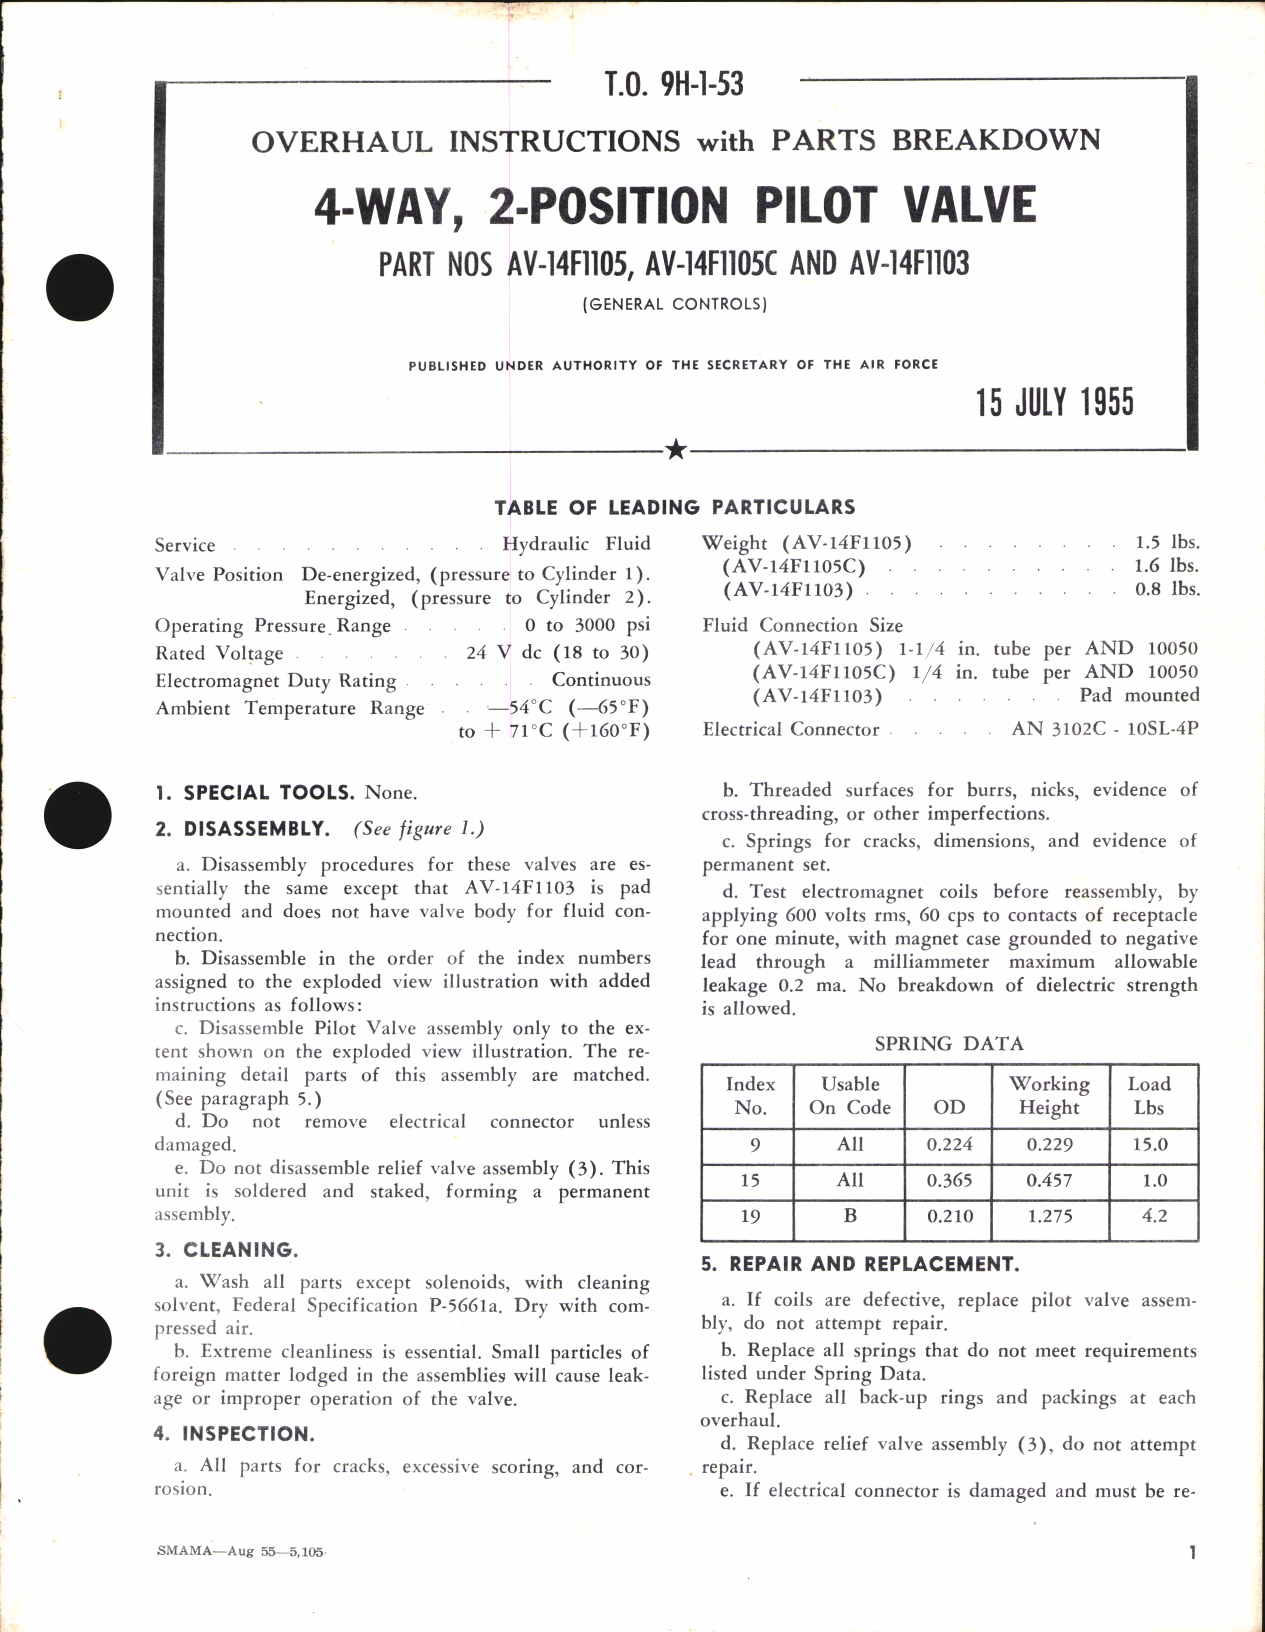 Sample page 1 from AirCorps Library document: Overhaul Instructions with Parts Breakdown for 4-Way. 2-Position Pilot Valve